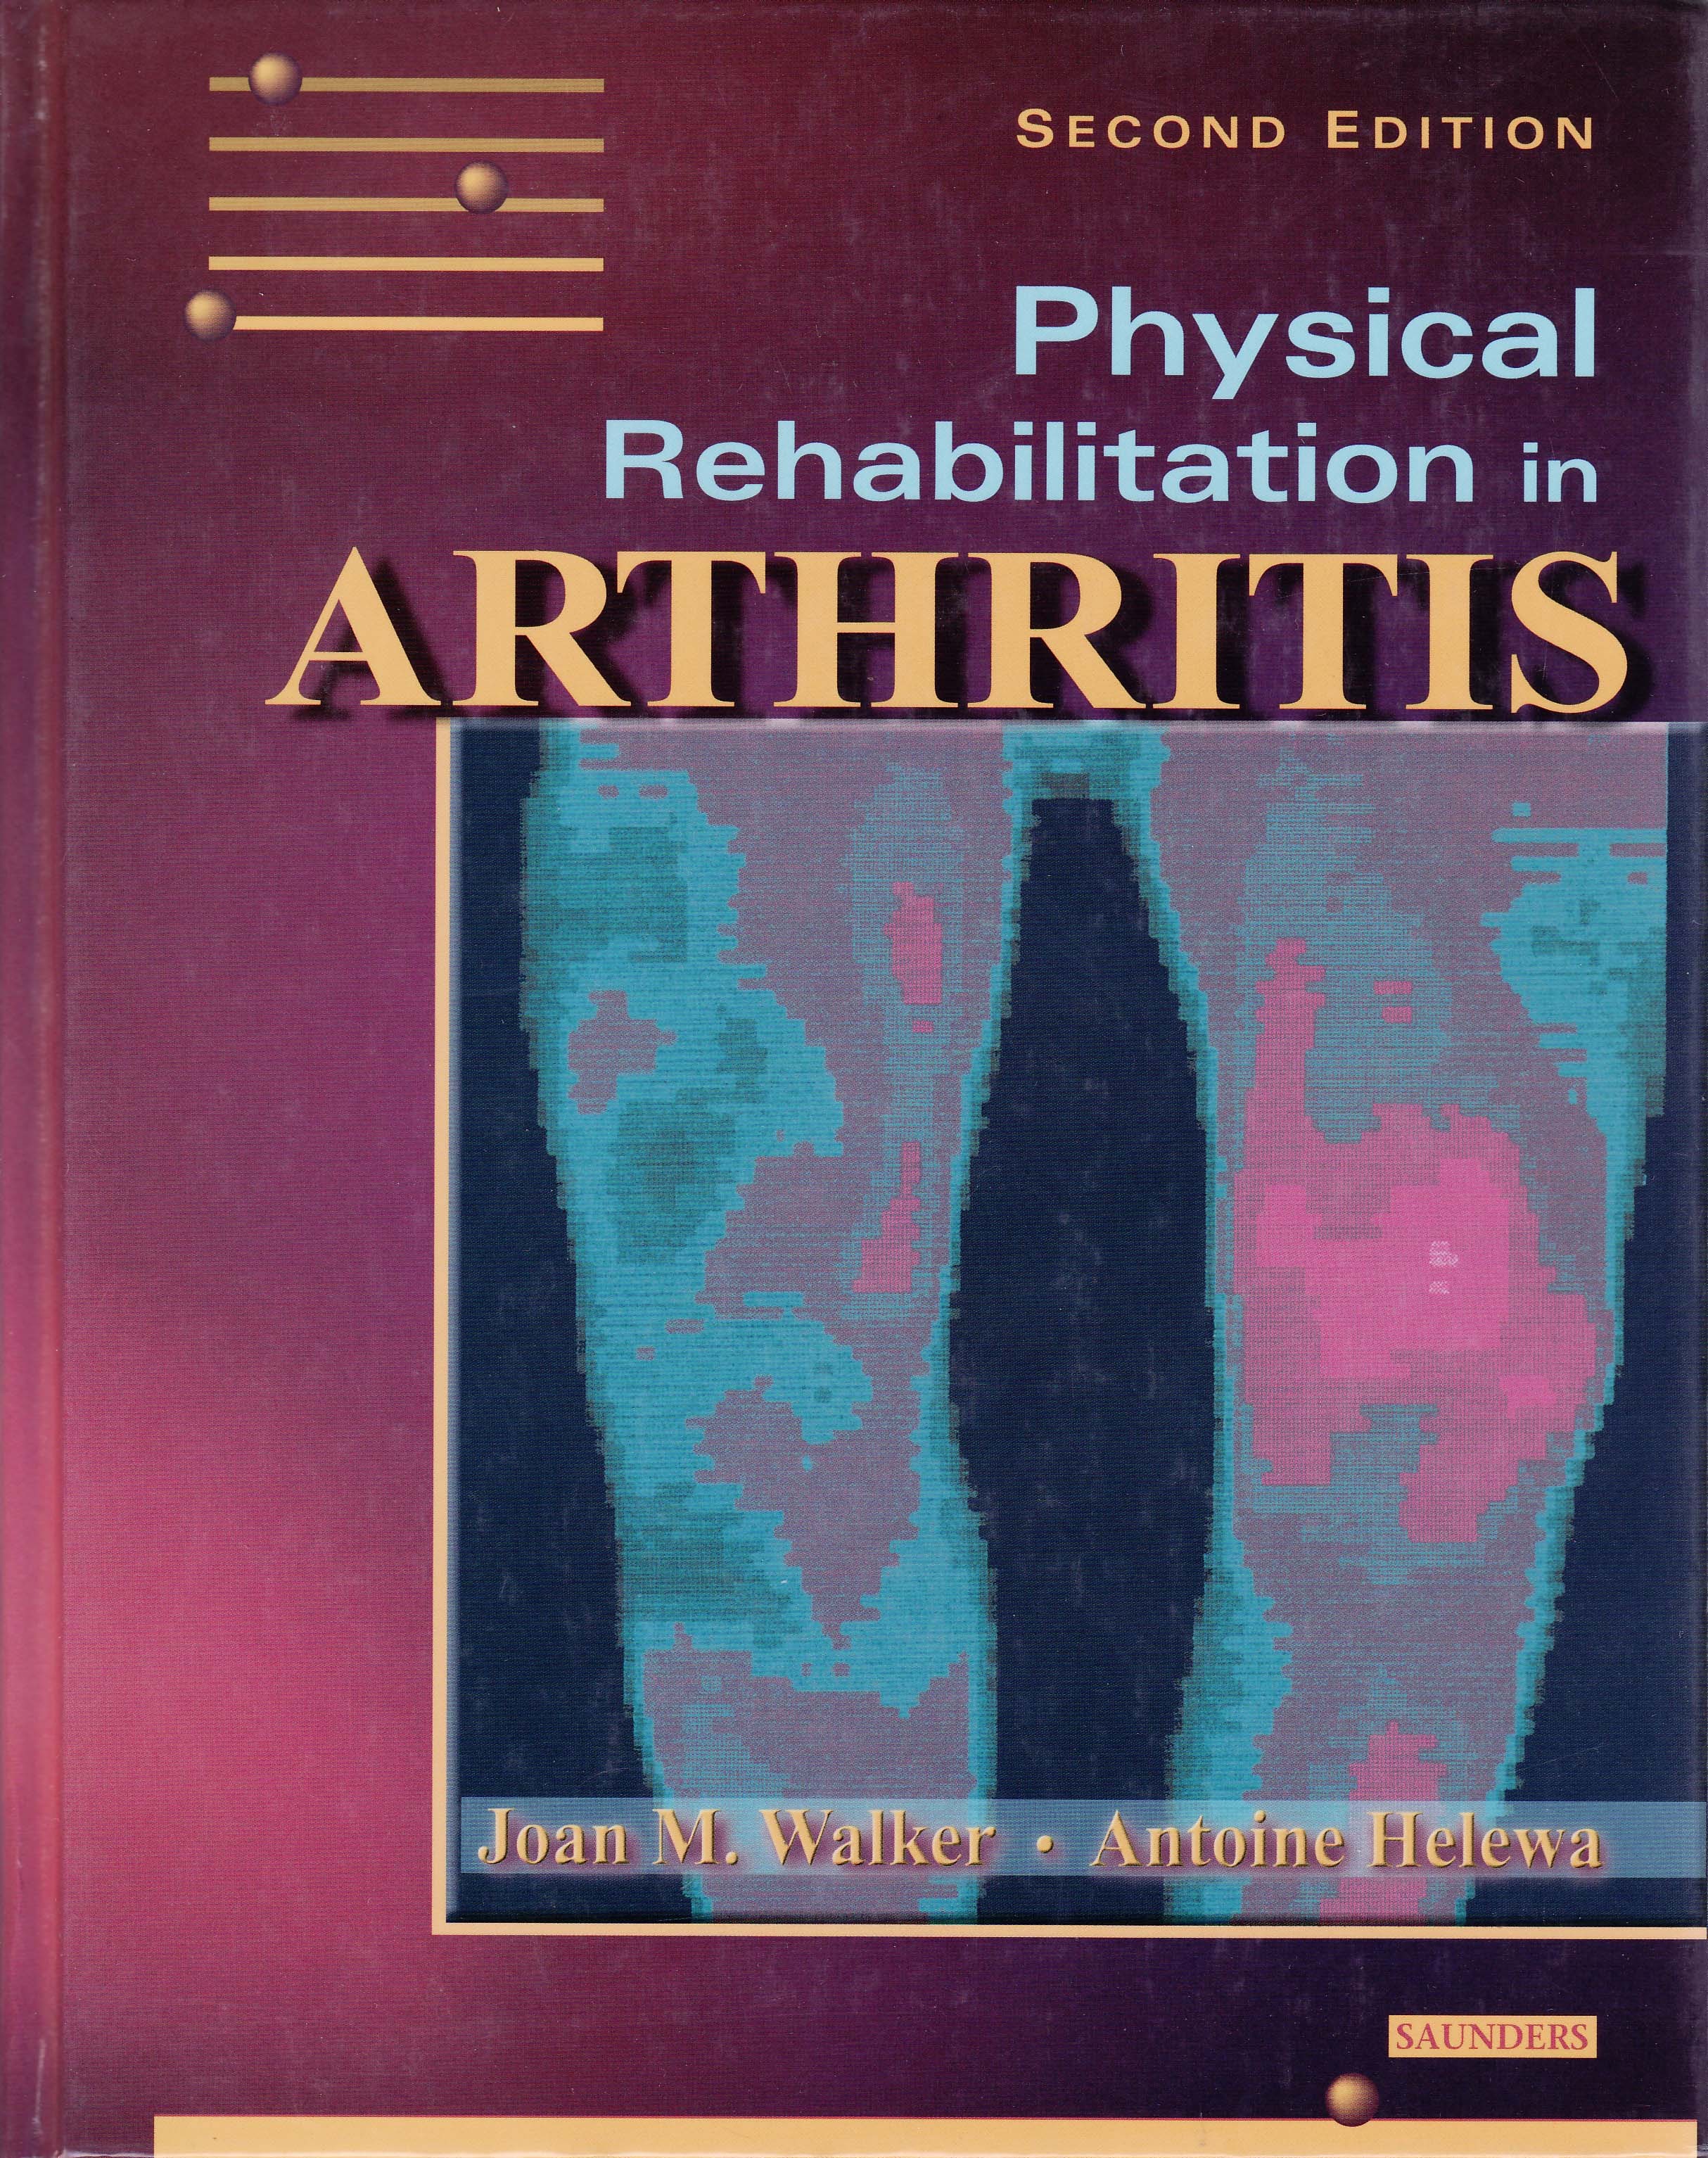 Share a Course: Physical Rehabilitation in Arthritis: Module 2 (Electronic Download)